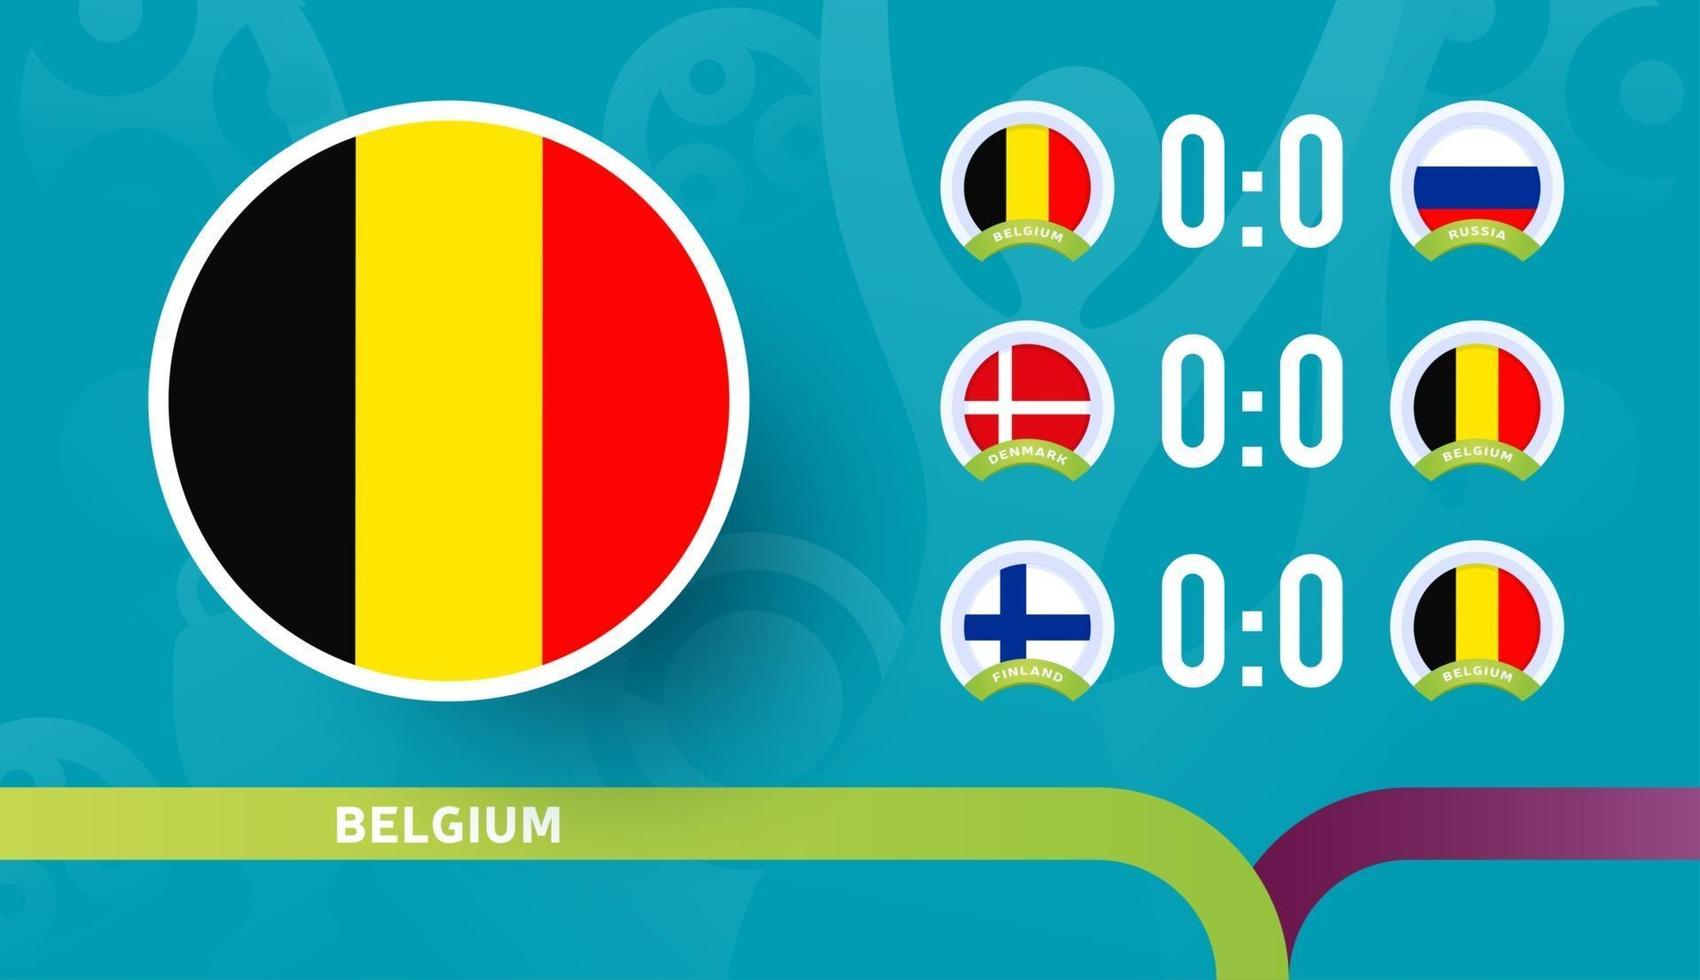 belgium national team Schedule matches in the final stage at the 2020 Football Championship. Vector illustration of football 2020 matches.